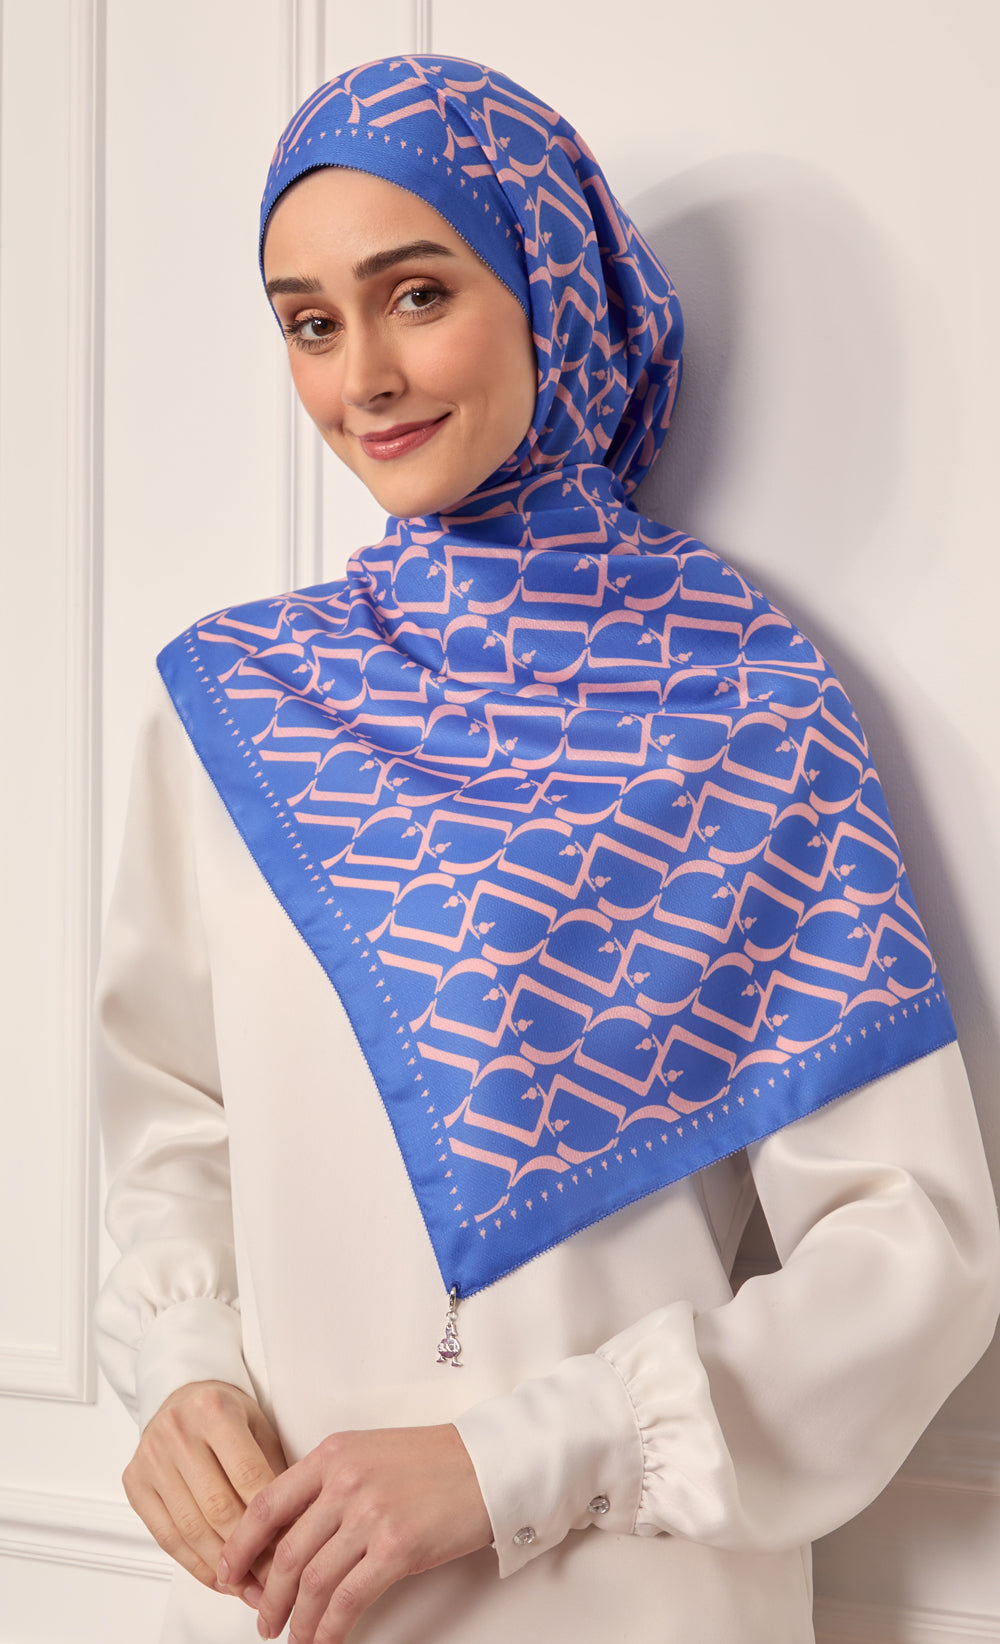 D Monogram dUCk Voile Shawl in Butterfly Pea